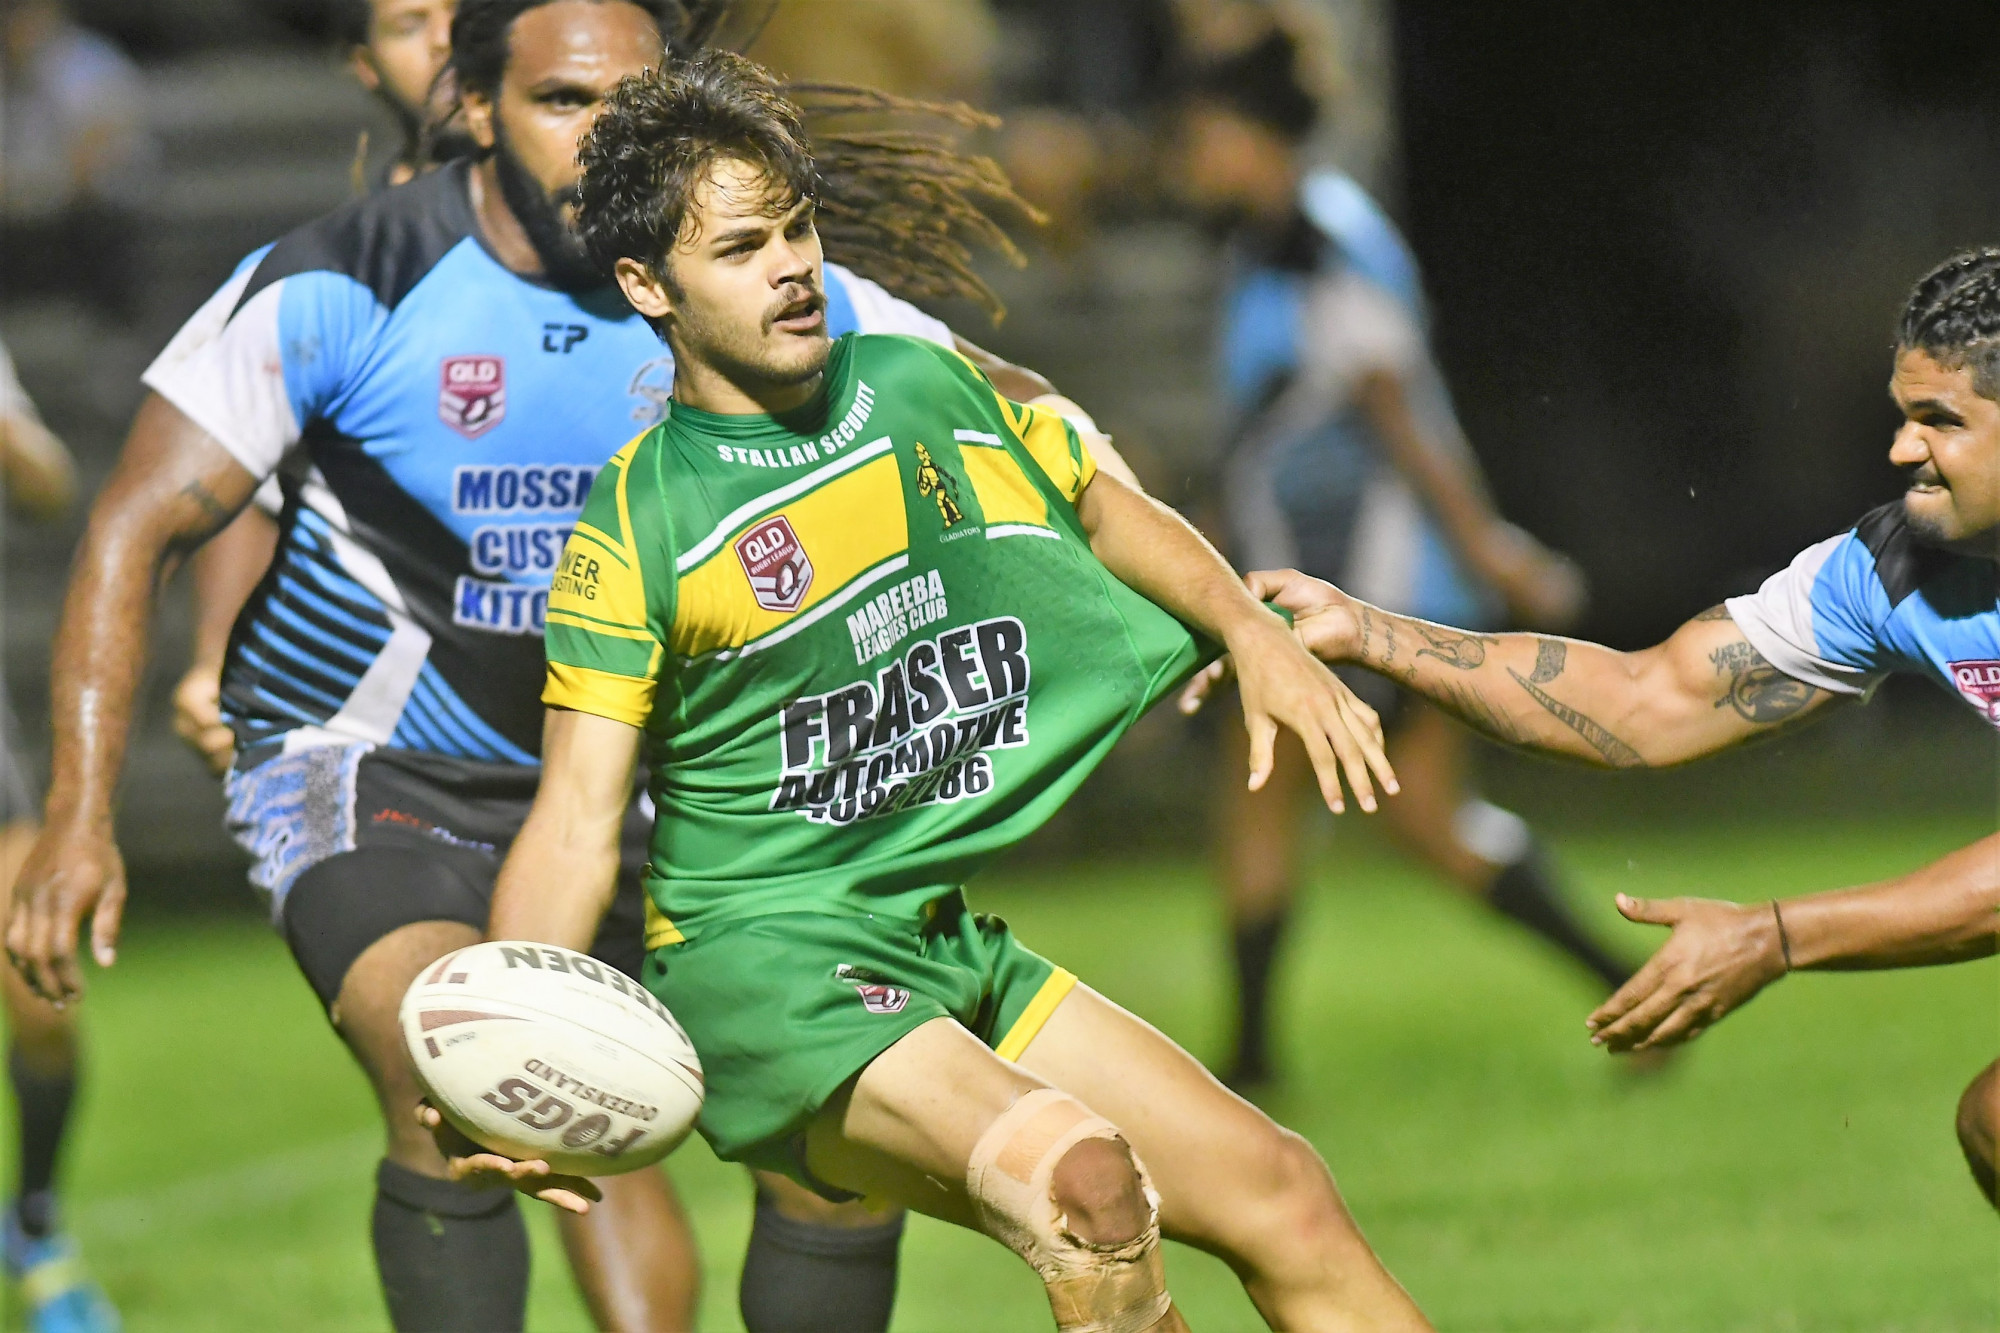 Mareeba’s Trezman Banjo being brought down by the Mossman Sharks in the Gators 35- 26 defeat at Davies Park on Saturday night